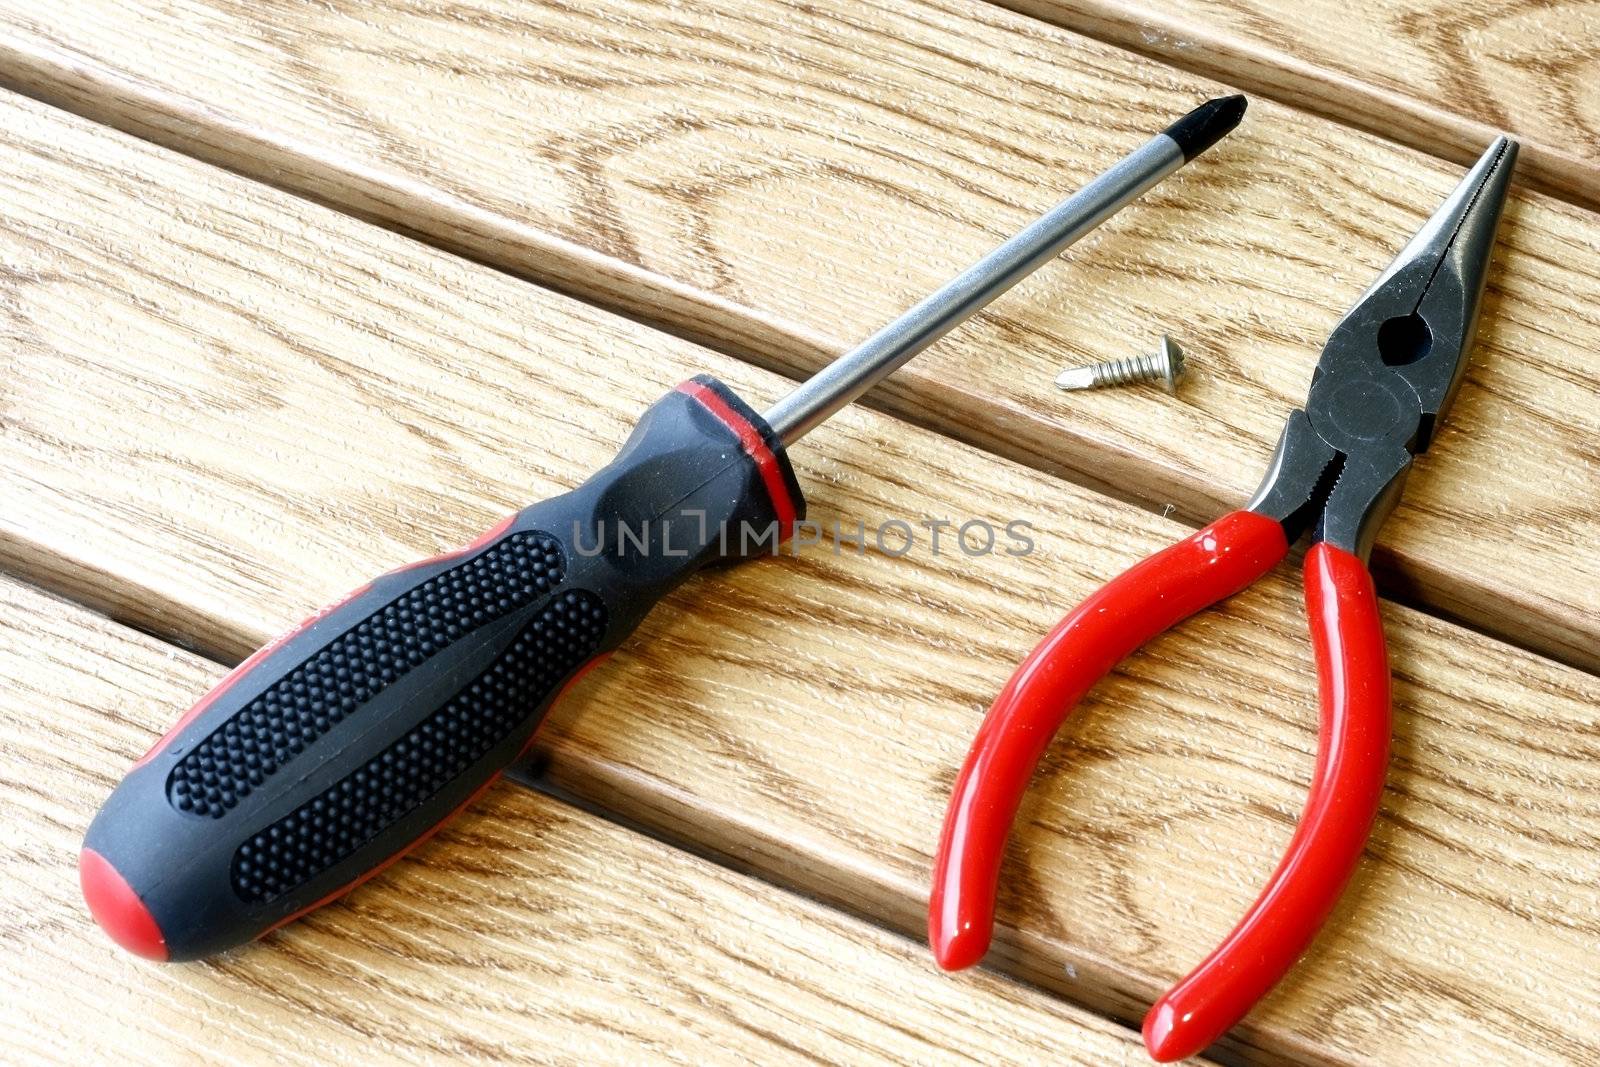 Screwdriver and Plier tools for handy do-it-yourself in a wooden tile background